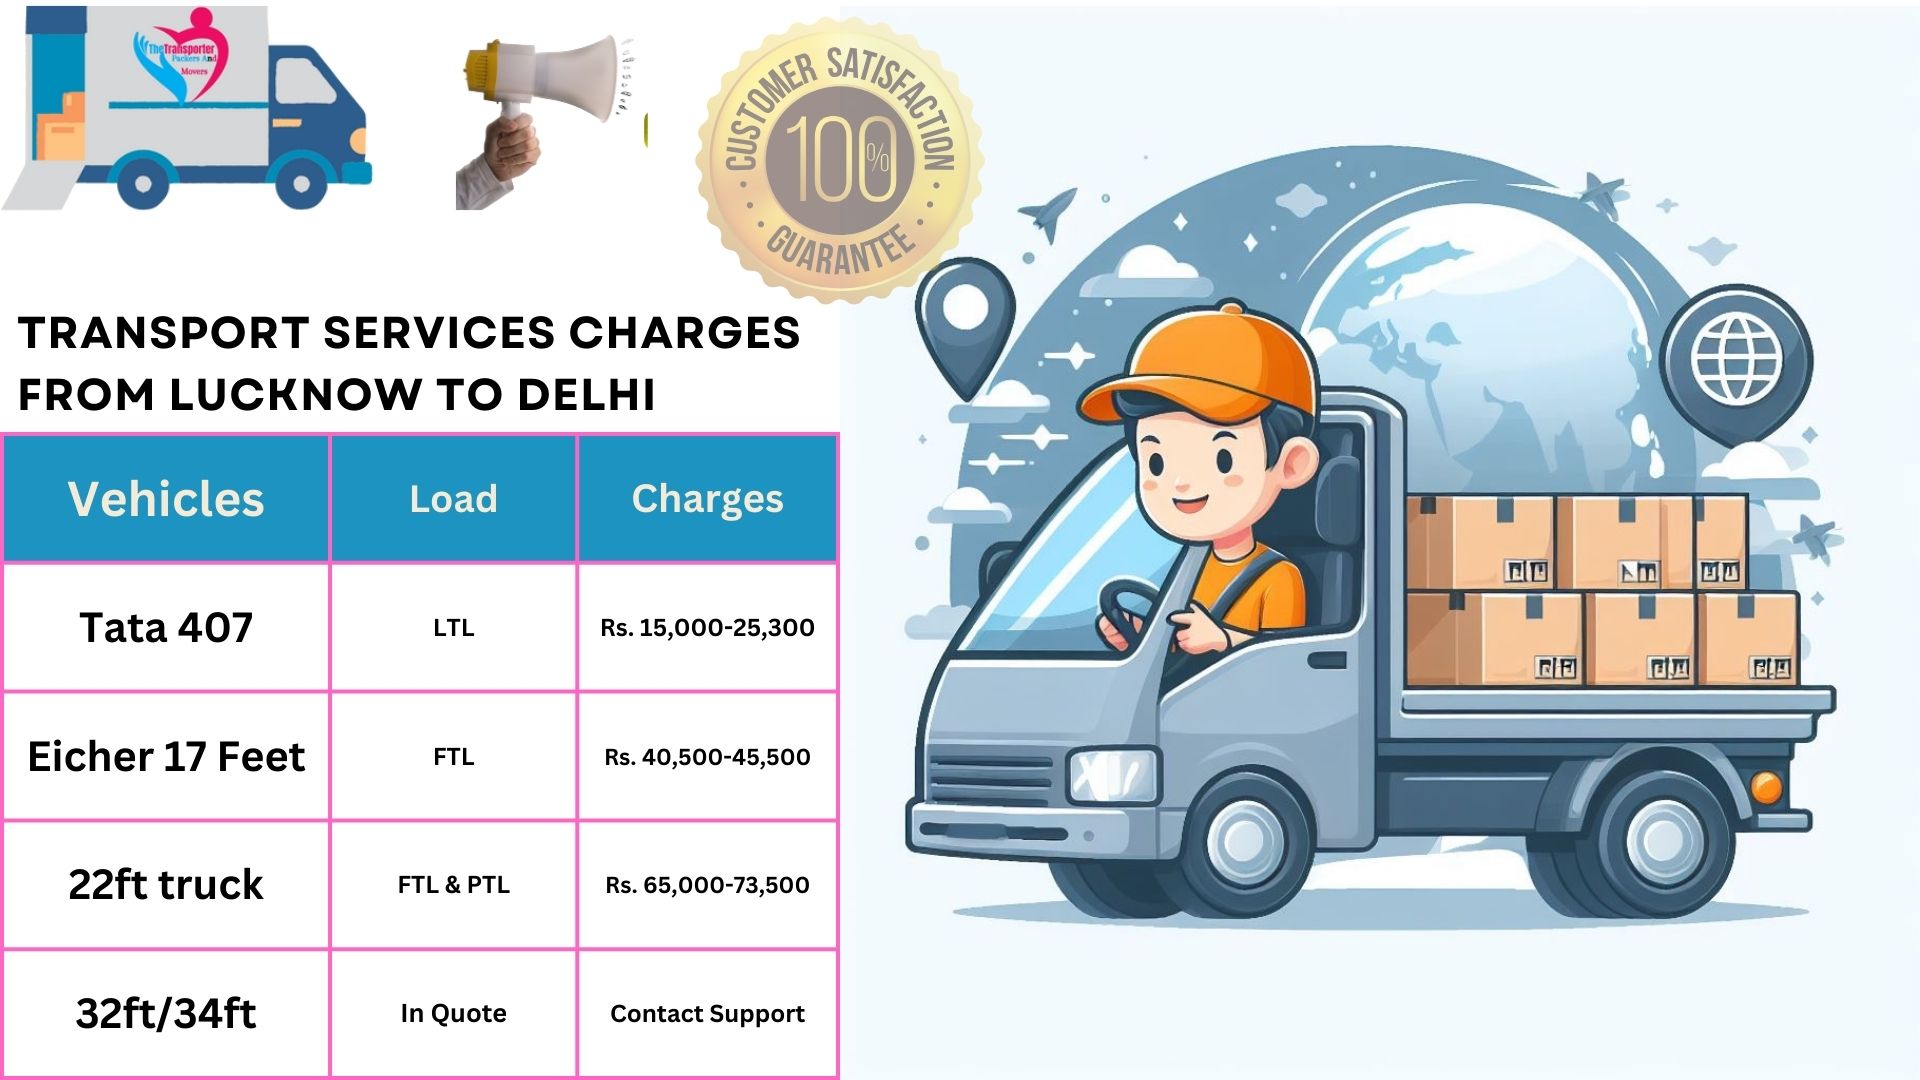 Your household goods shifting from Lucknow to Delhi